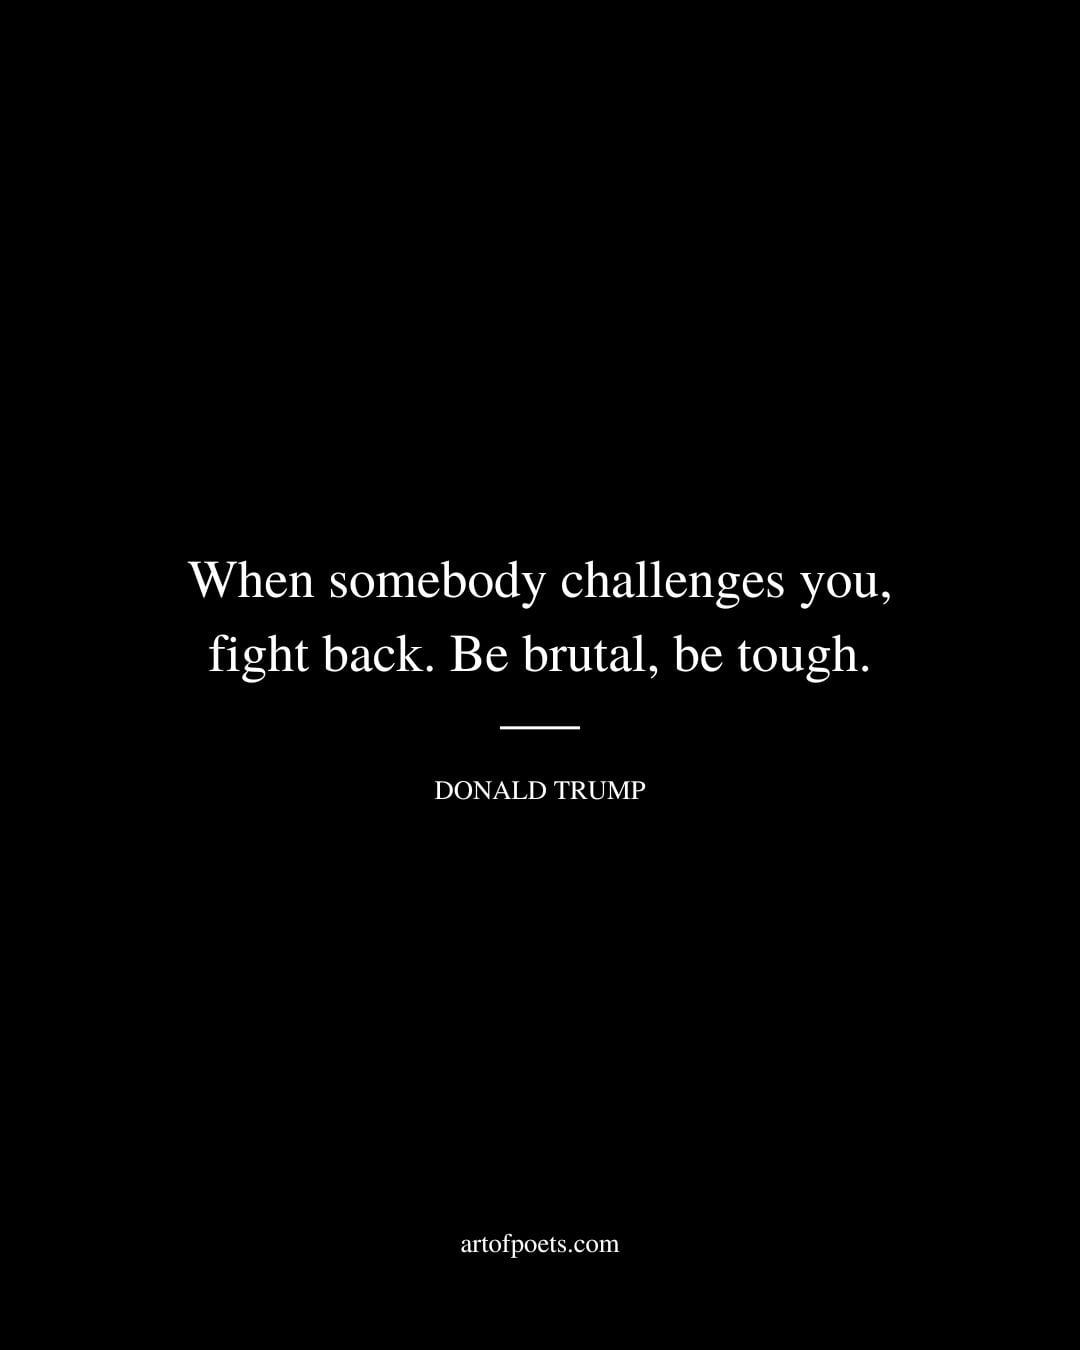 When somebody challenges you fight back. Be brutal be tough